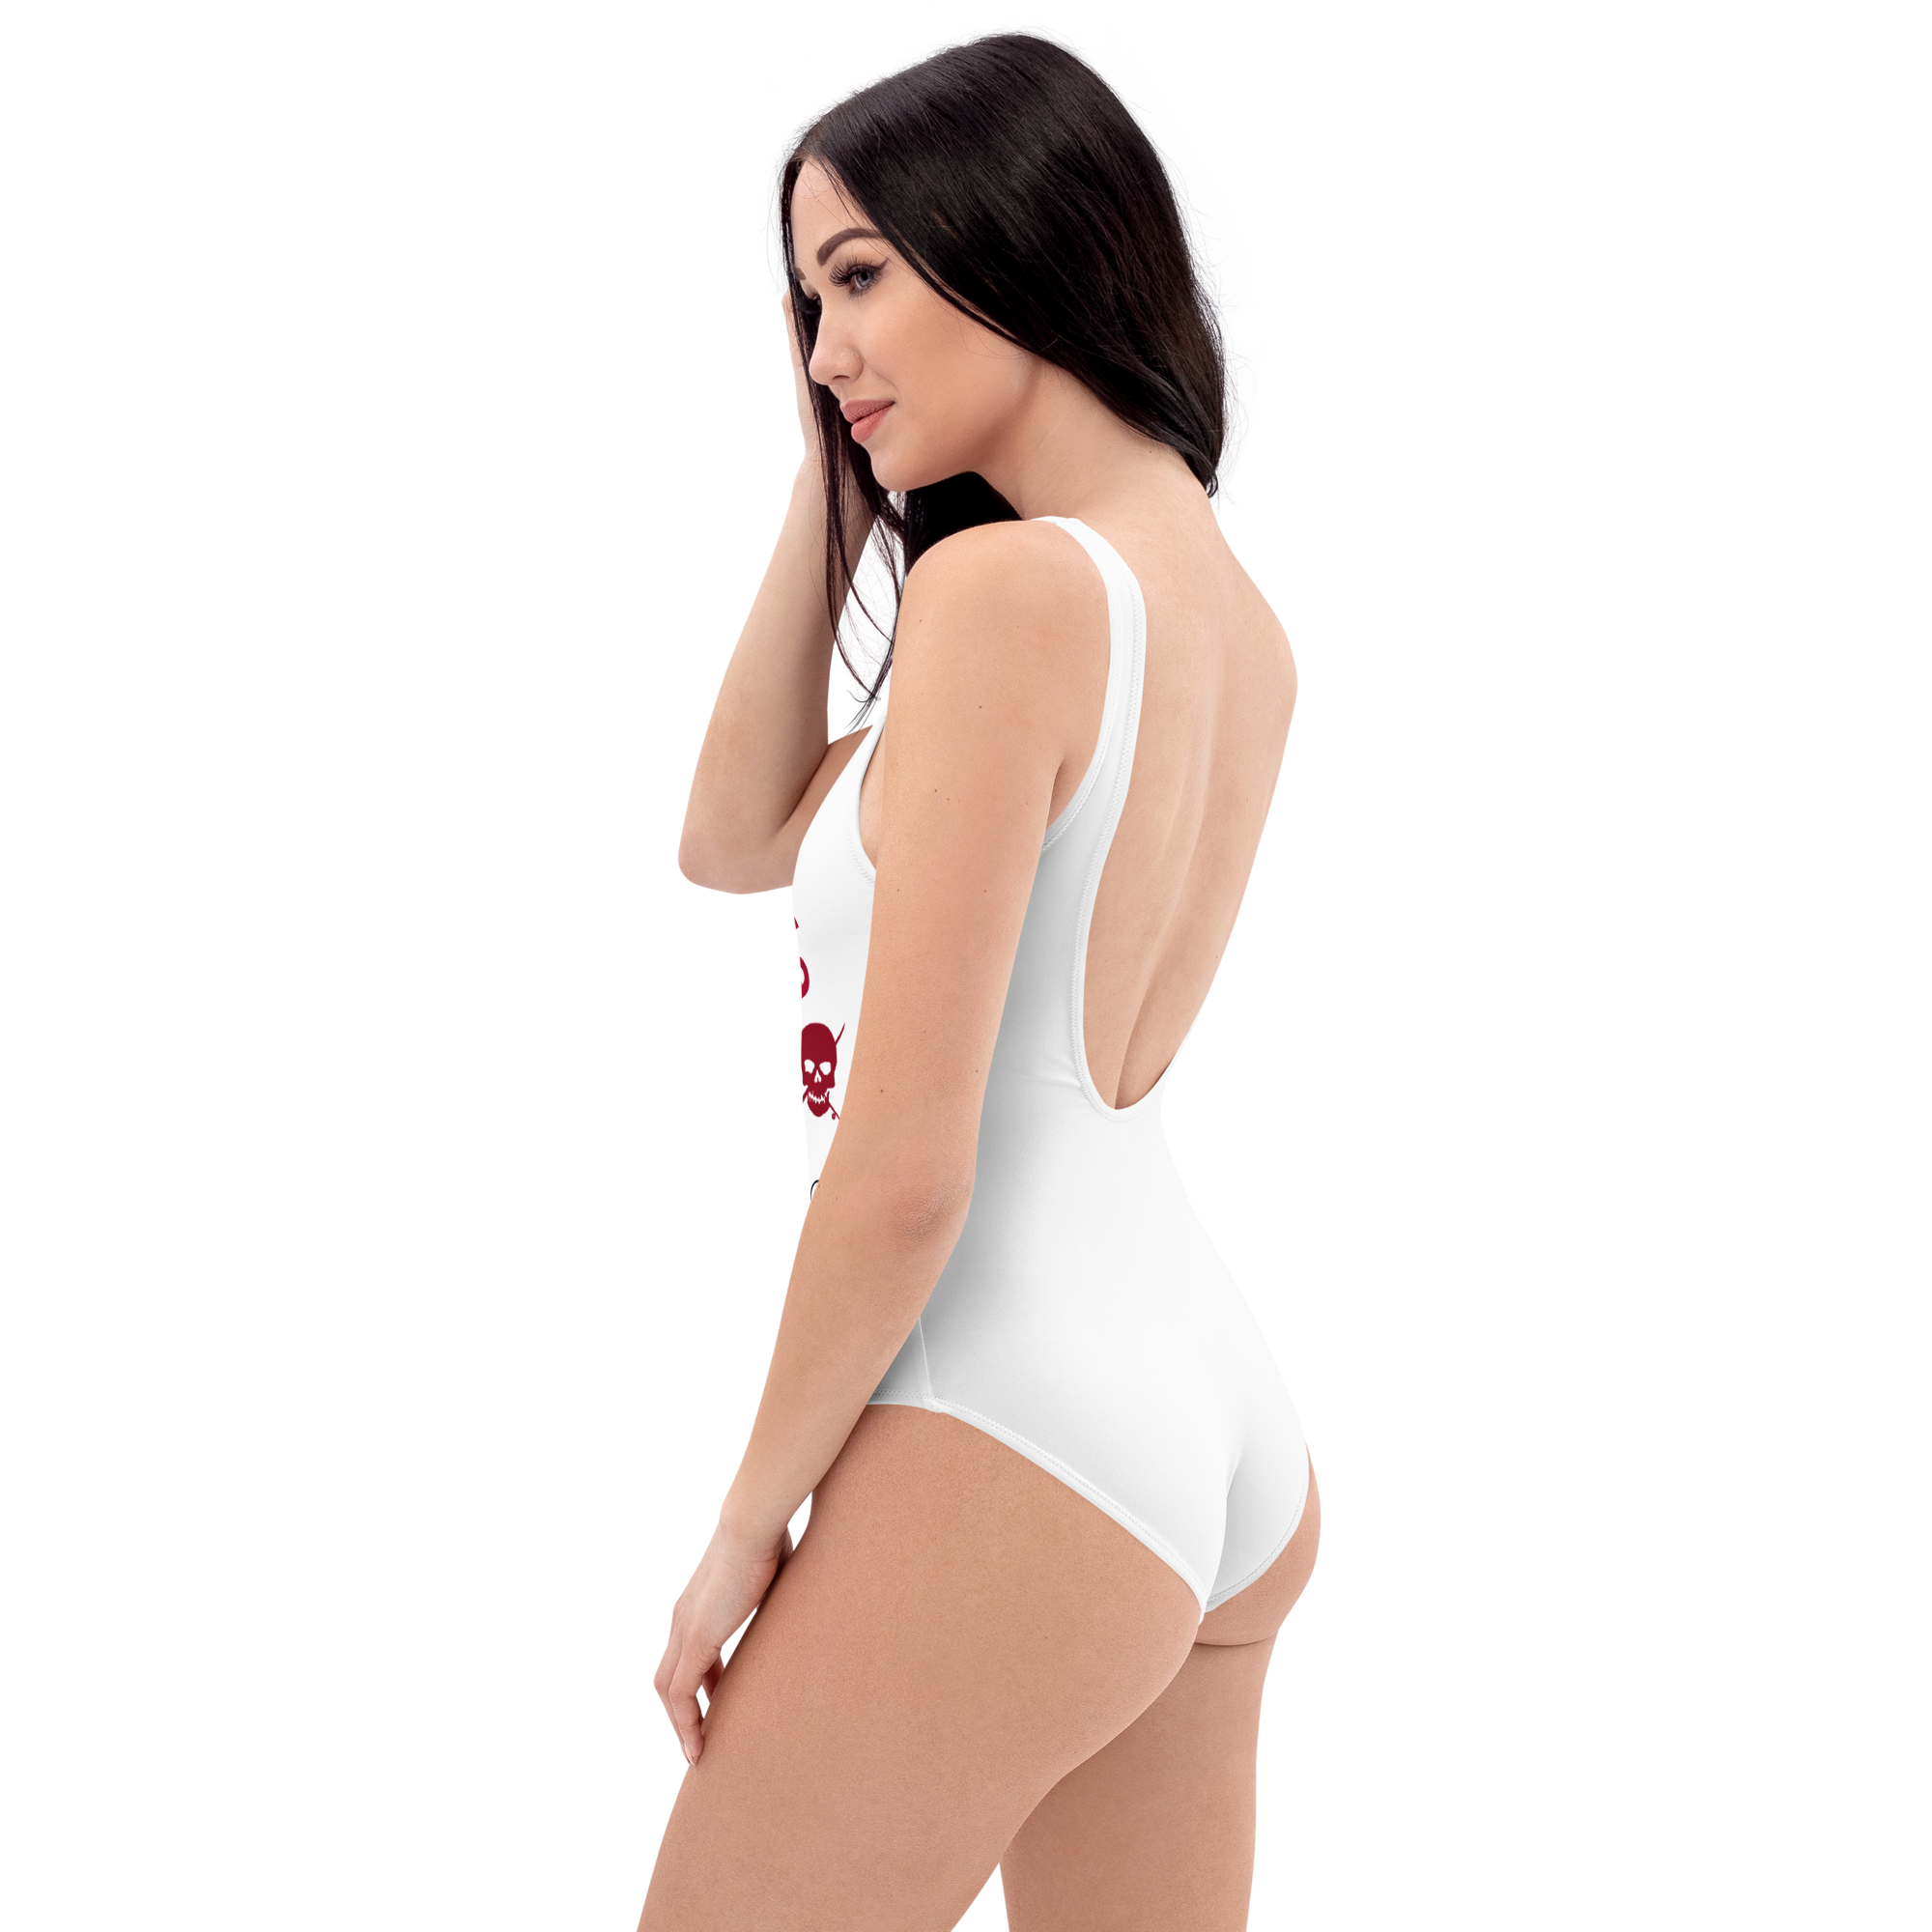 Board Life Safety One-Piece Swimsuit